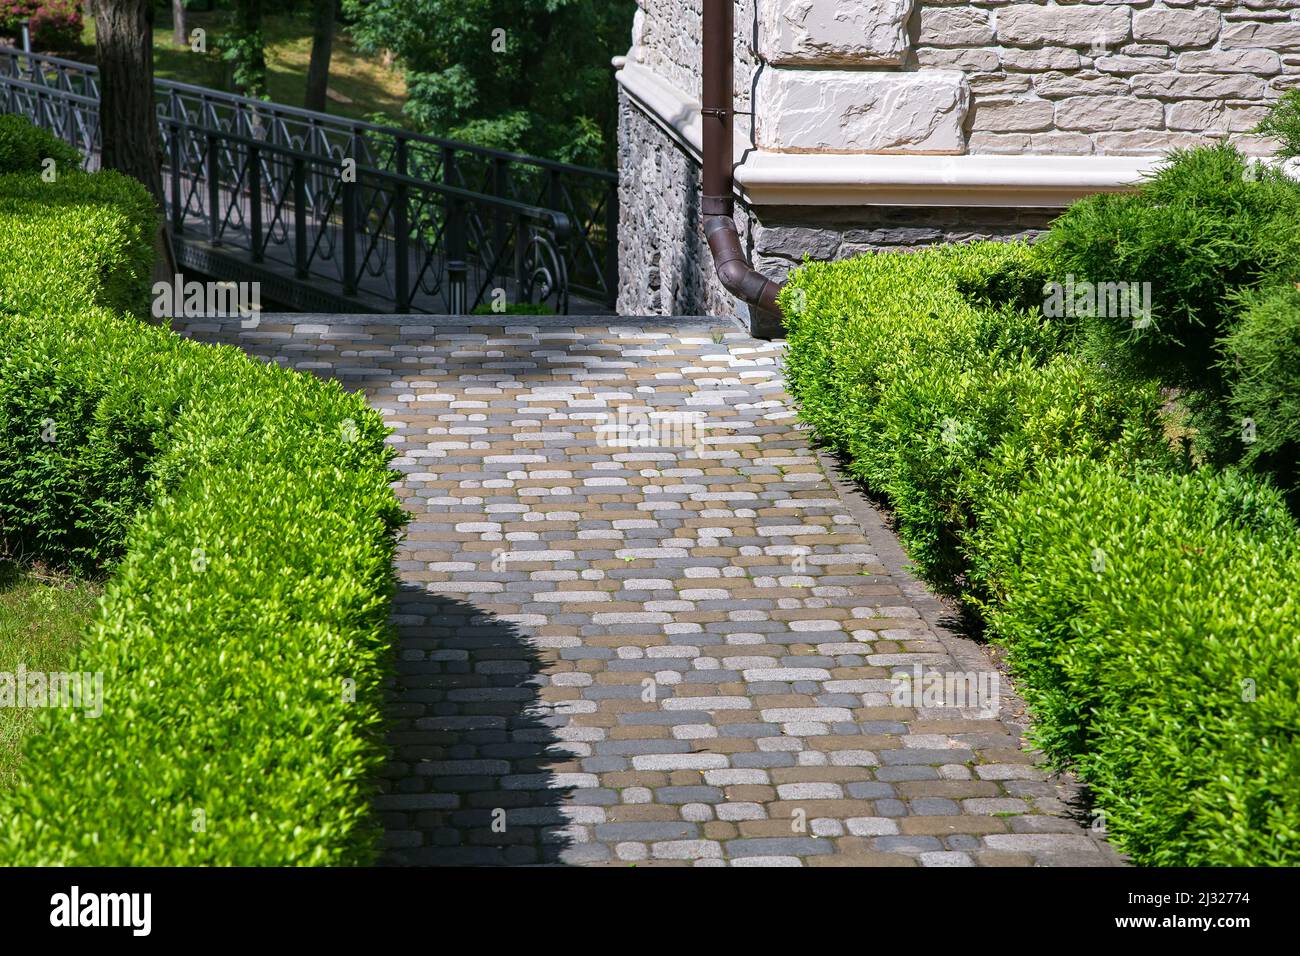 a stone tile path paved in the backyard with green clipped boxwood bushes at the corner of the facade of the house made of decorative rough stone and Stock Photo